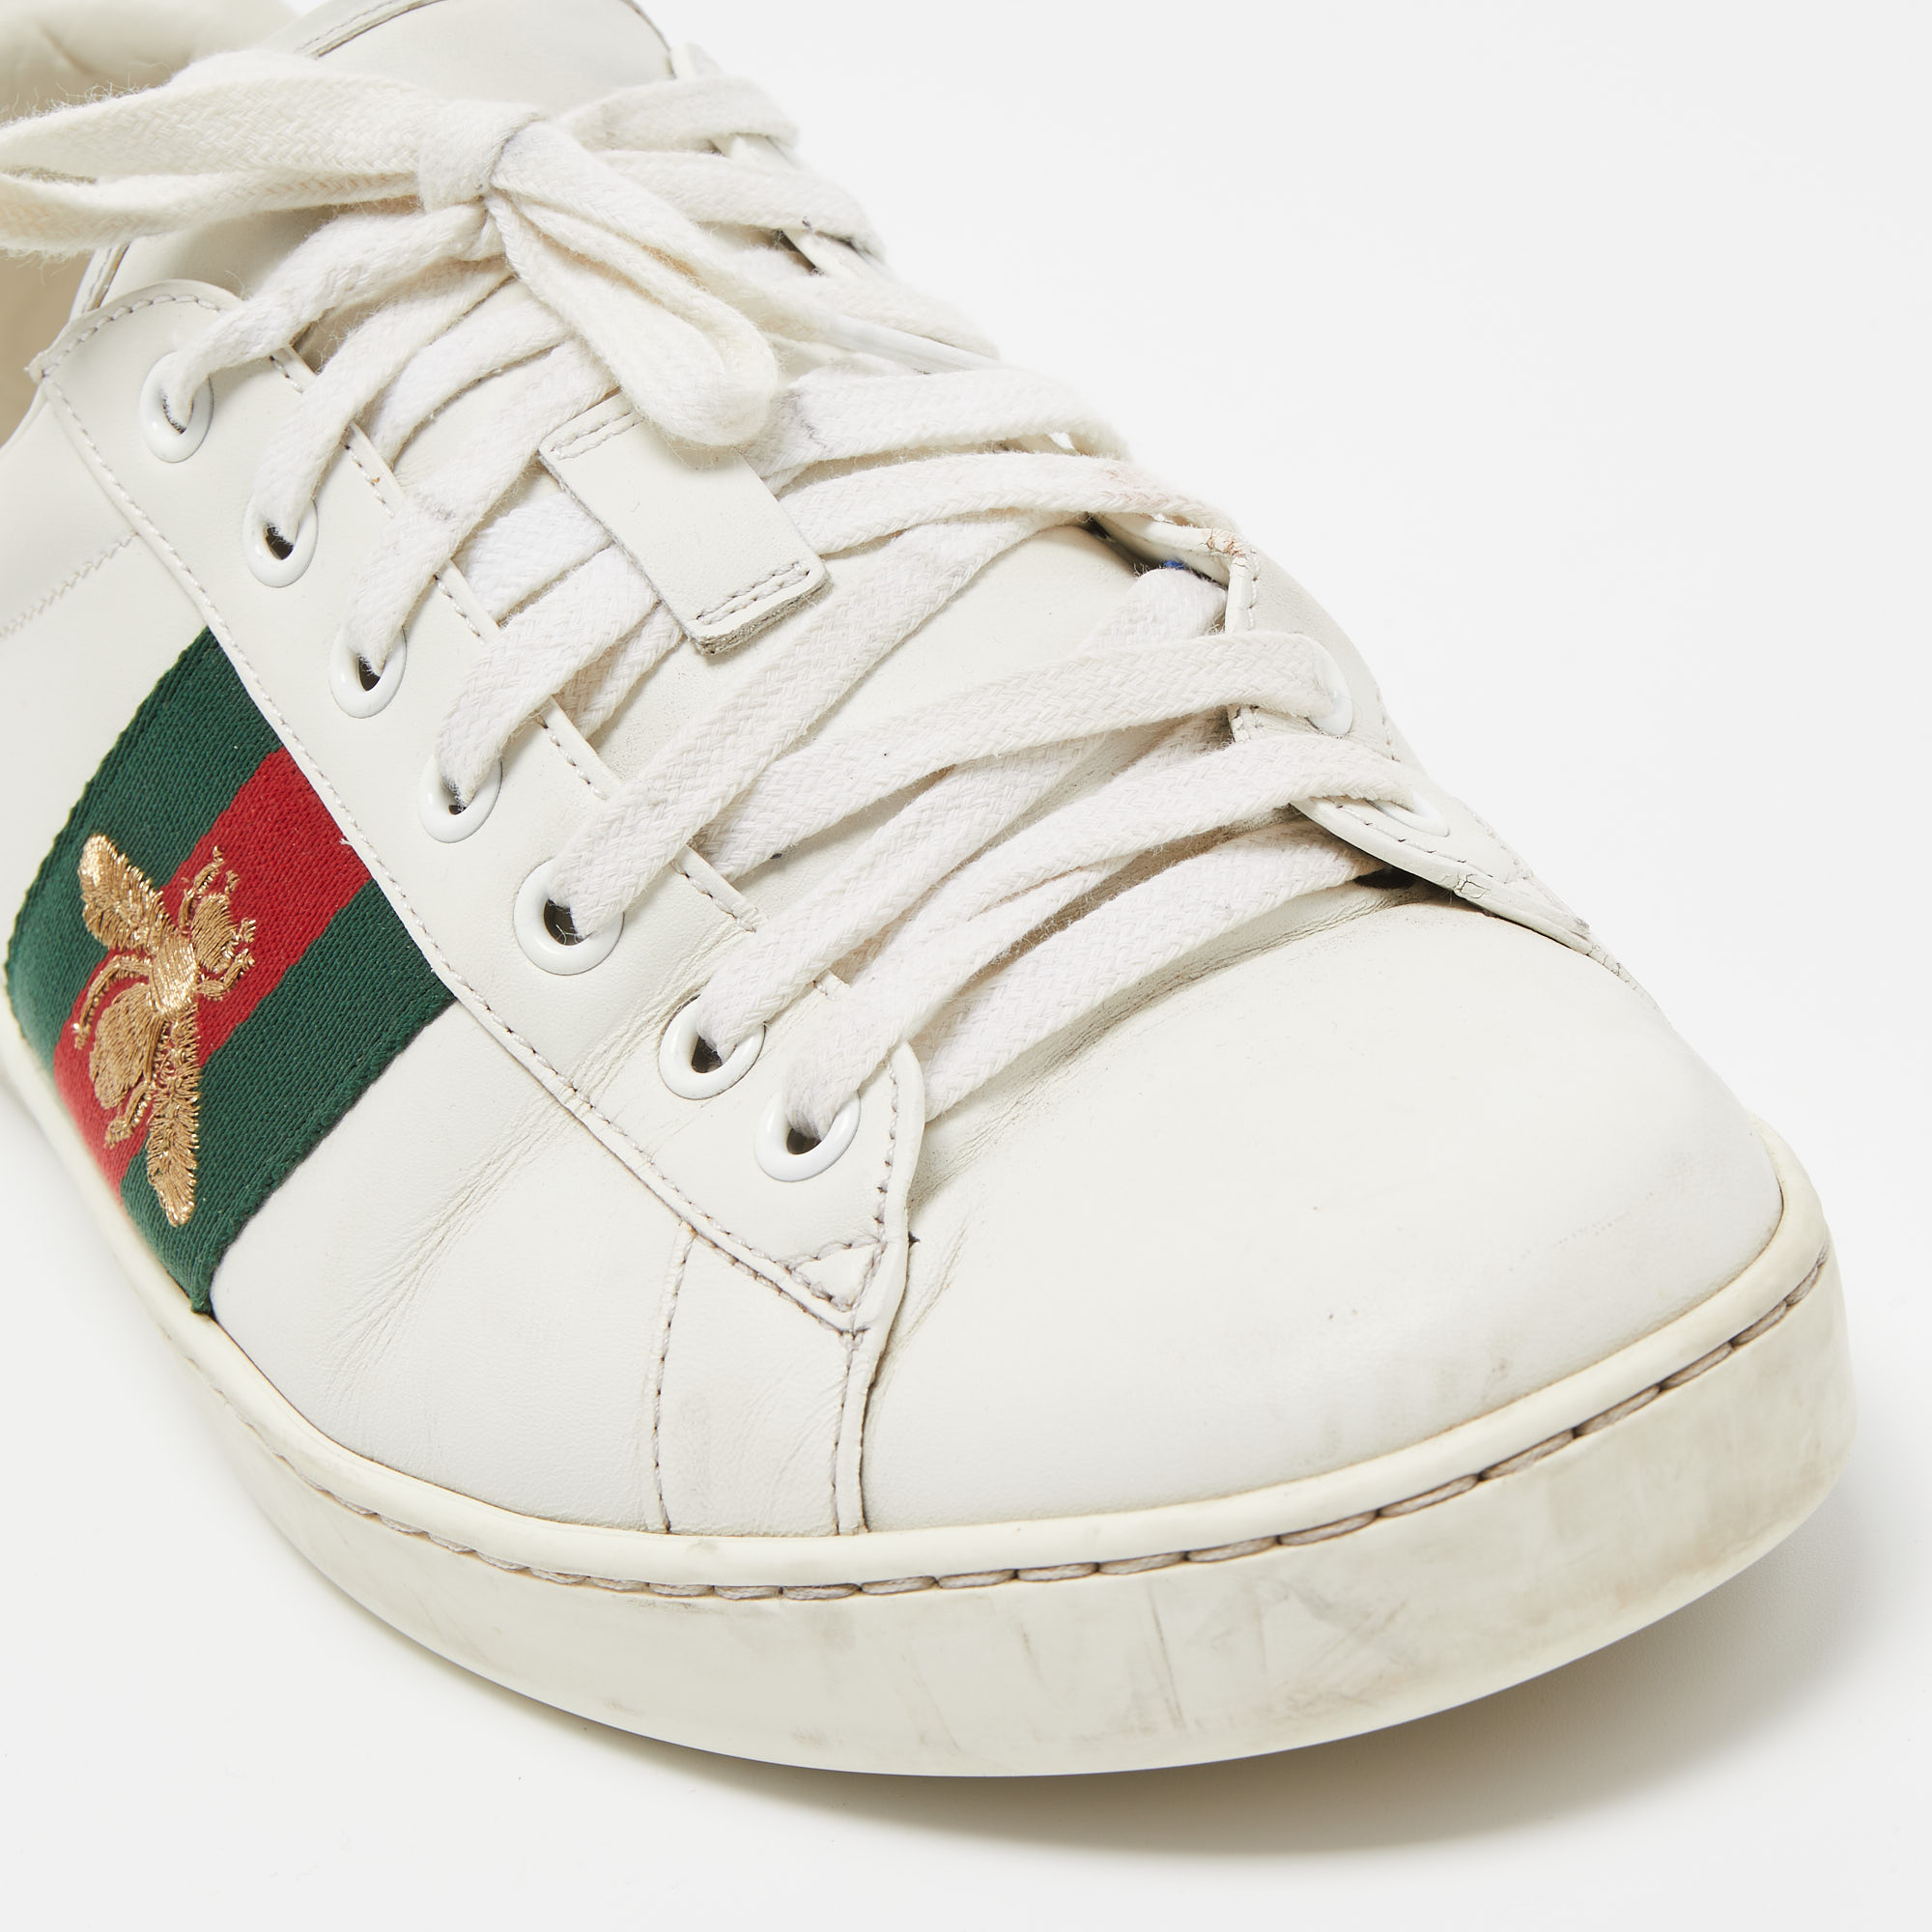 Gucci White Leather Embroidered Bee Ace Sneakers Size 43